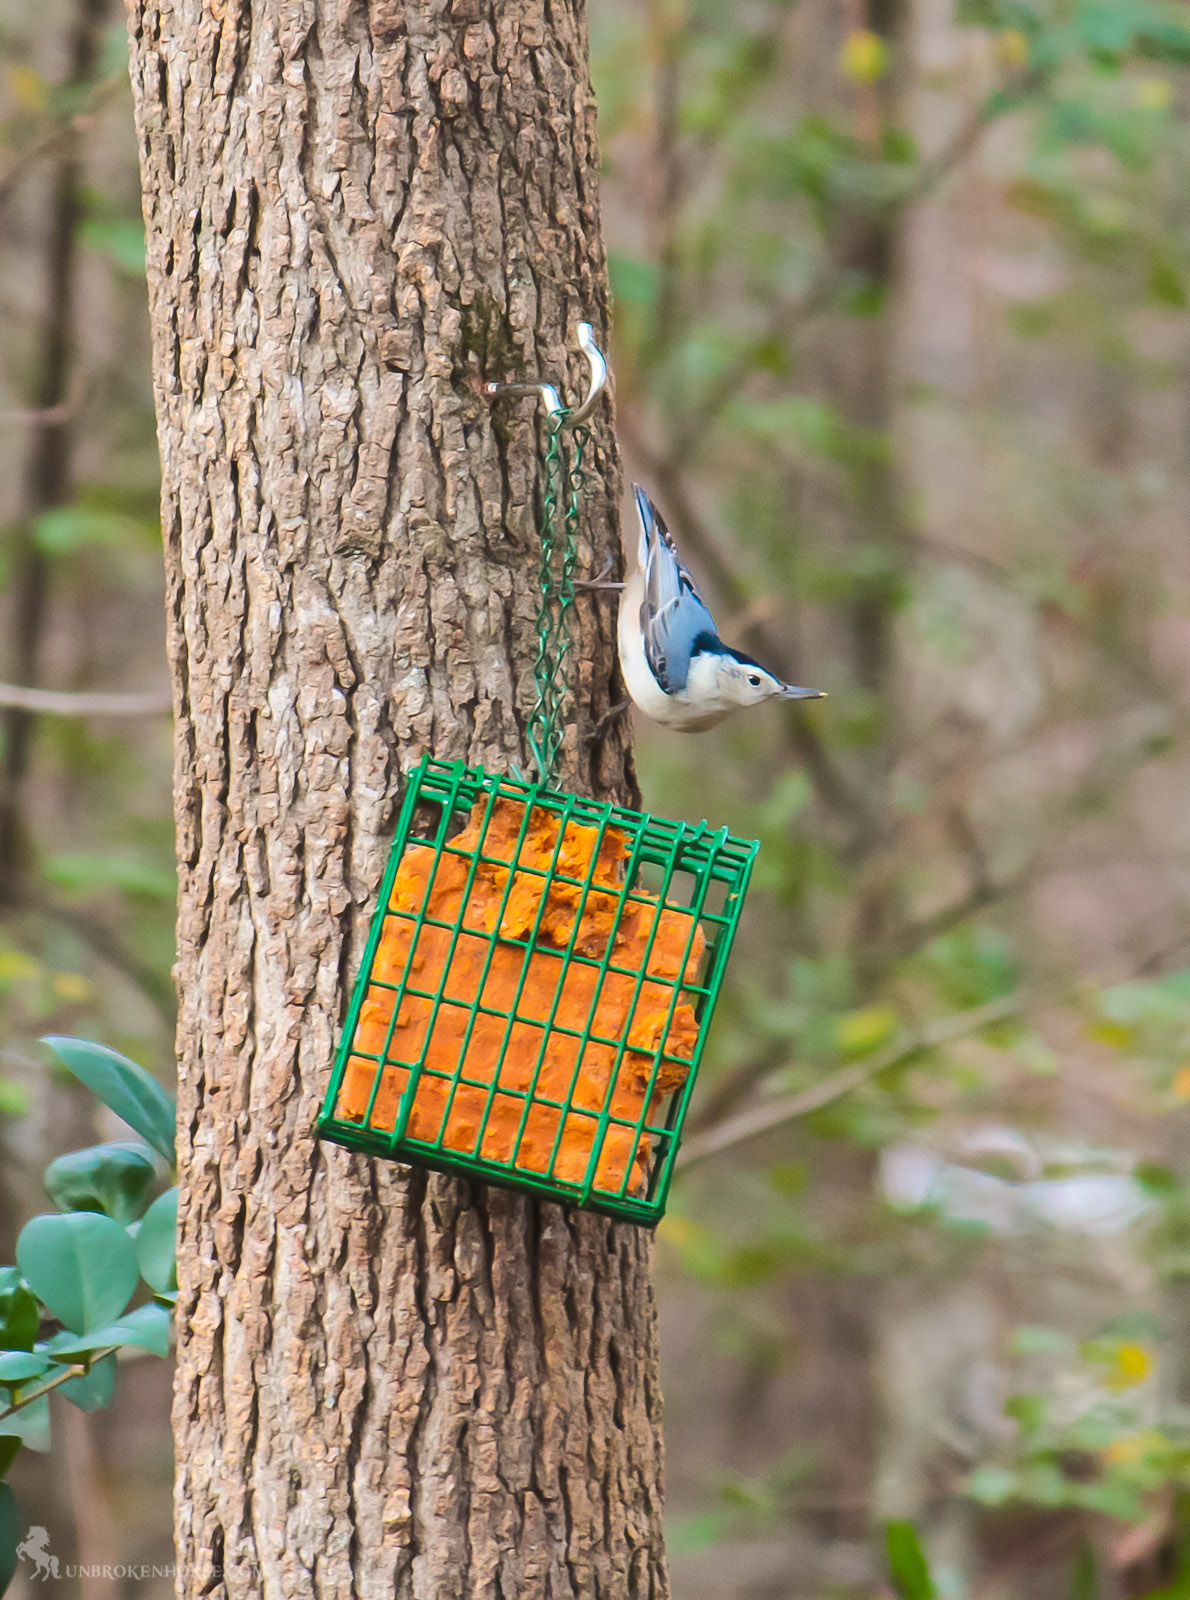 A common feeder bird with clean black, gray, and white markings, White-breasted Nuthatches are active, agile little birds with an appetite for insects and large, meaty seeds. They get their common name from their habit of jamming large nuts and acorns into tree bark, then whacking them with their sharp bill to â€œhatchâ€ out the seed from the inside. White-breasted Nuthatches may be small but their voices are loud, and often their insistent nasal yammering will lead you right to them.